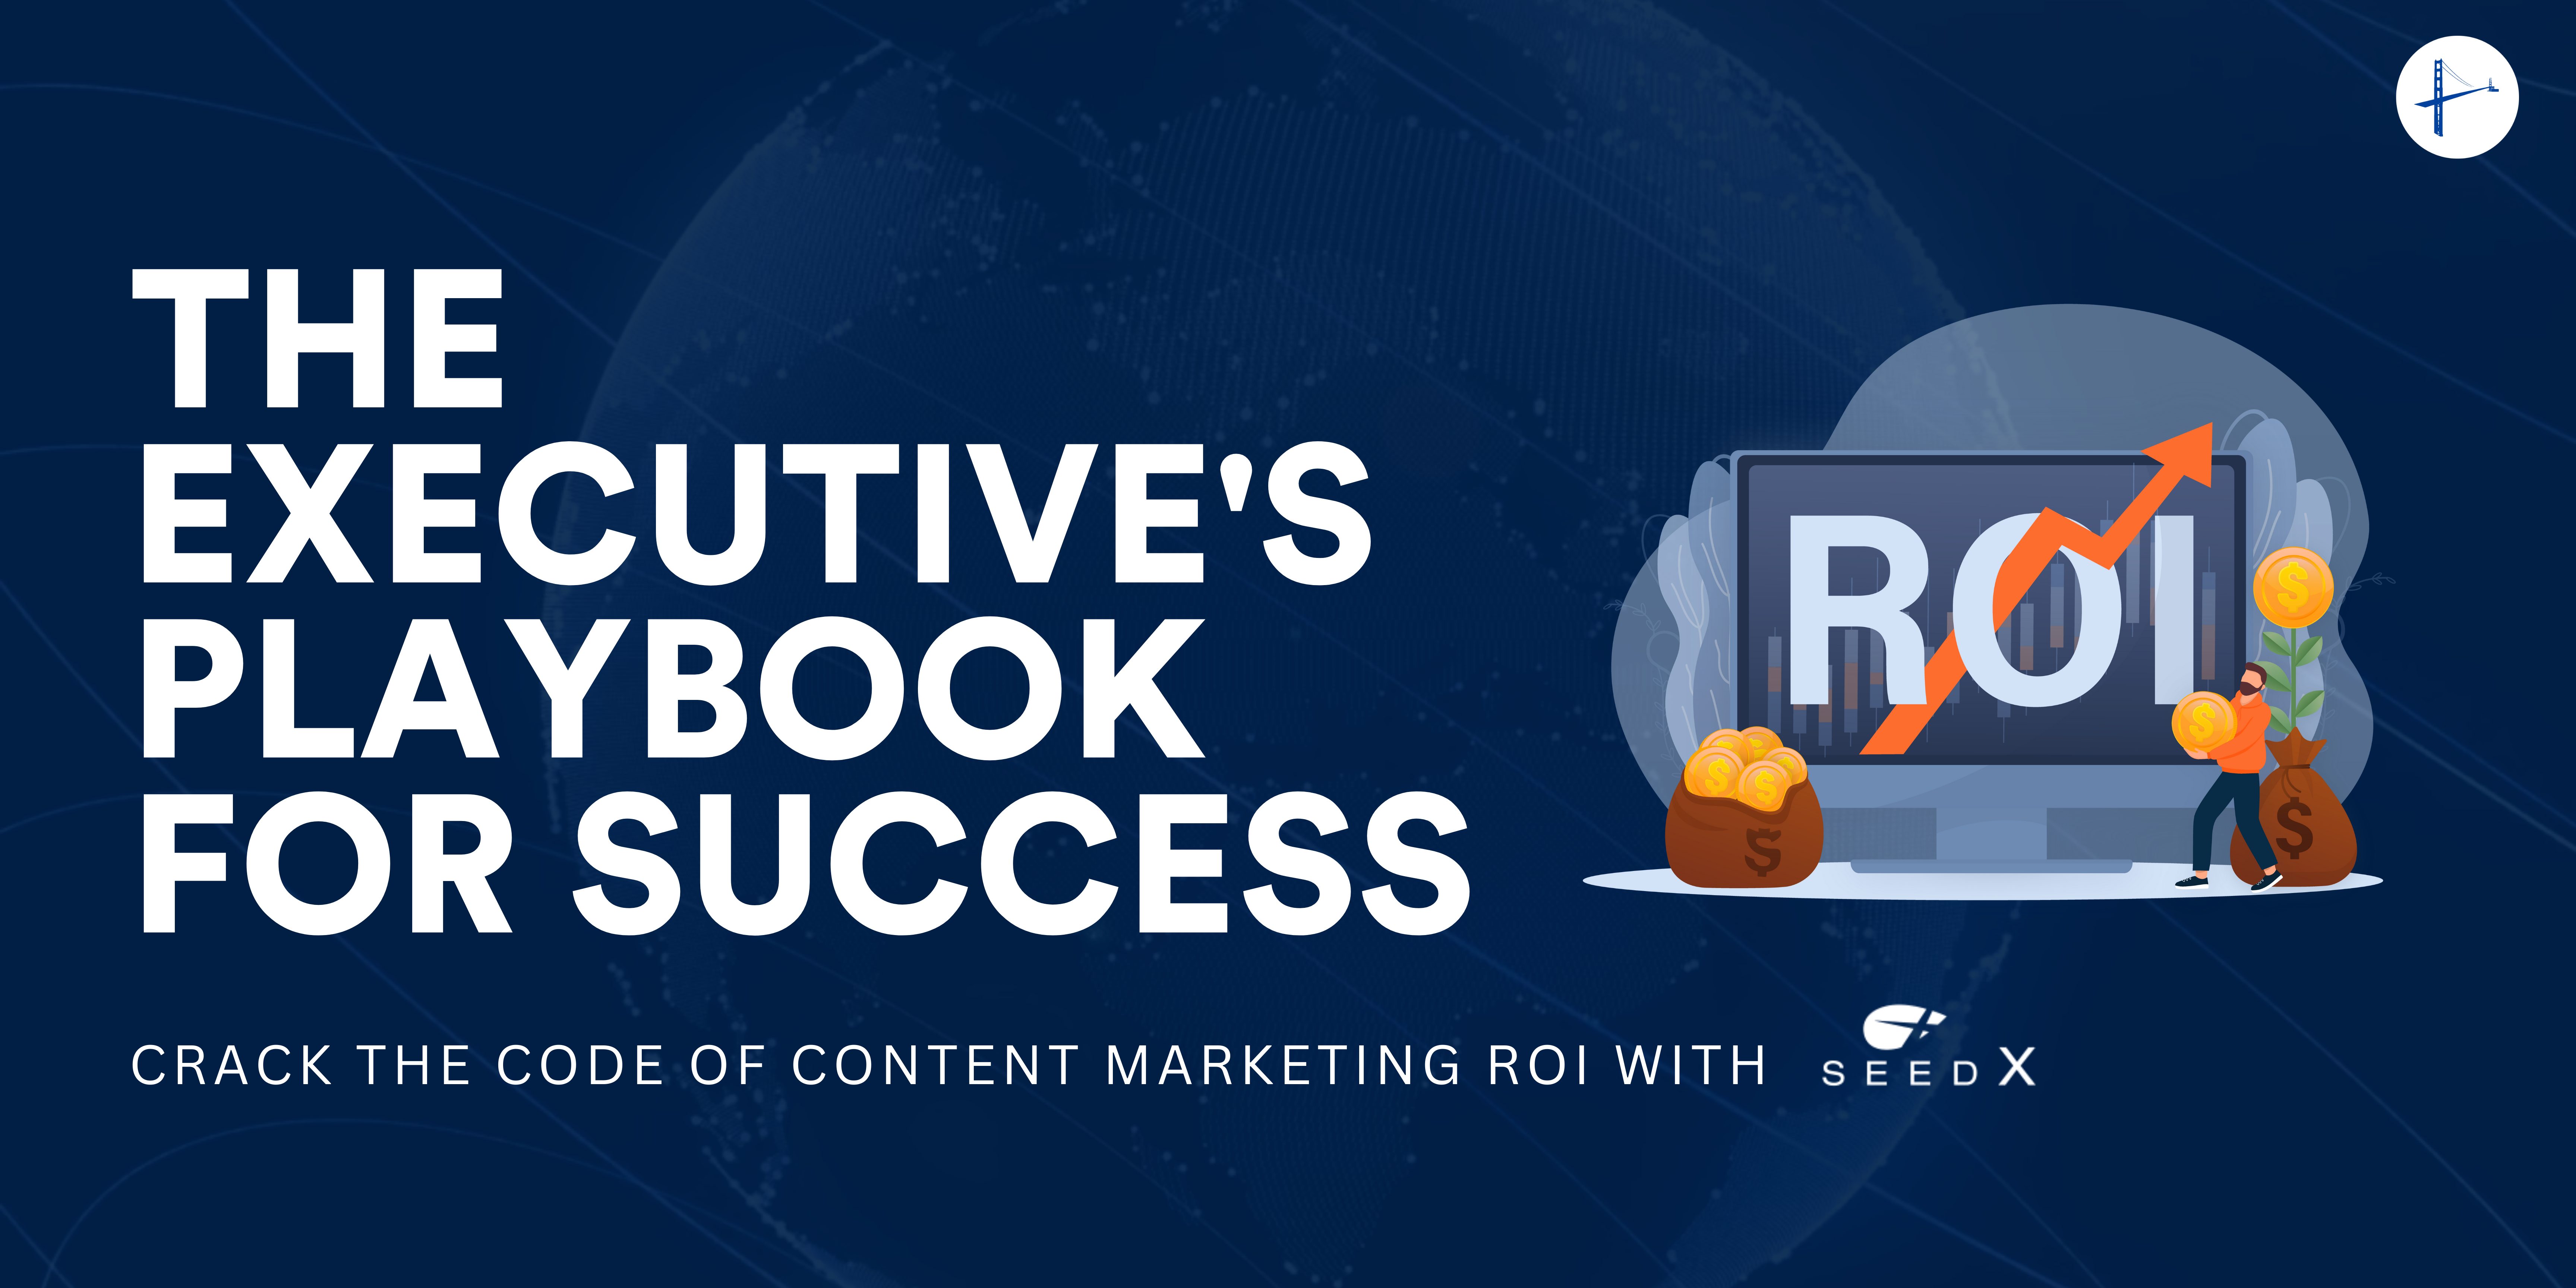 Crack the Code of Content Marketing ROI: The Executive’s Playbook for Success with SeedX